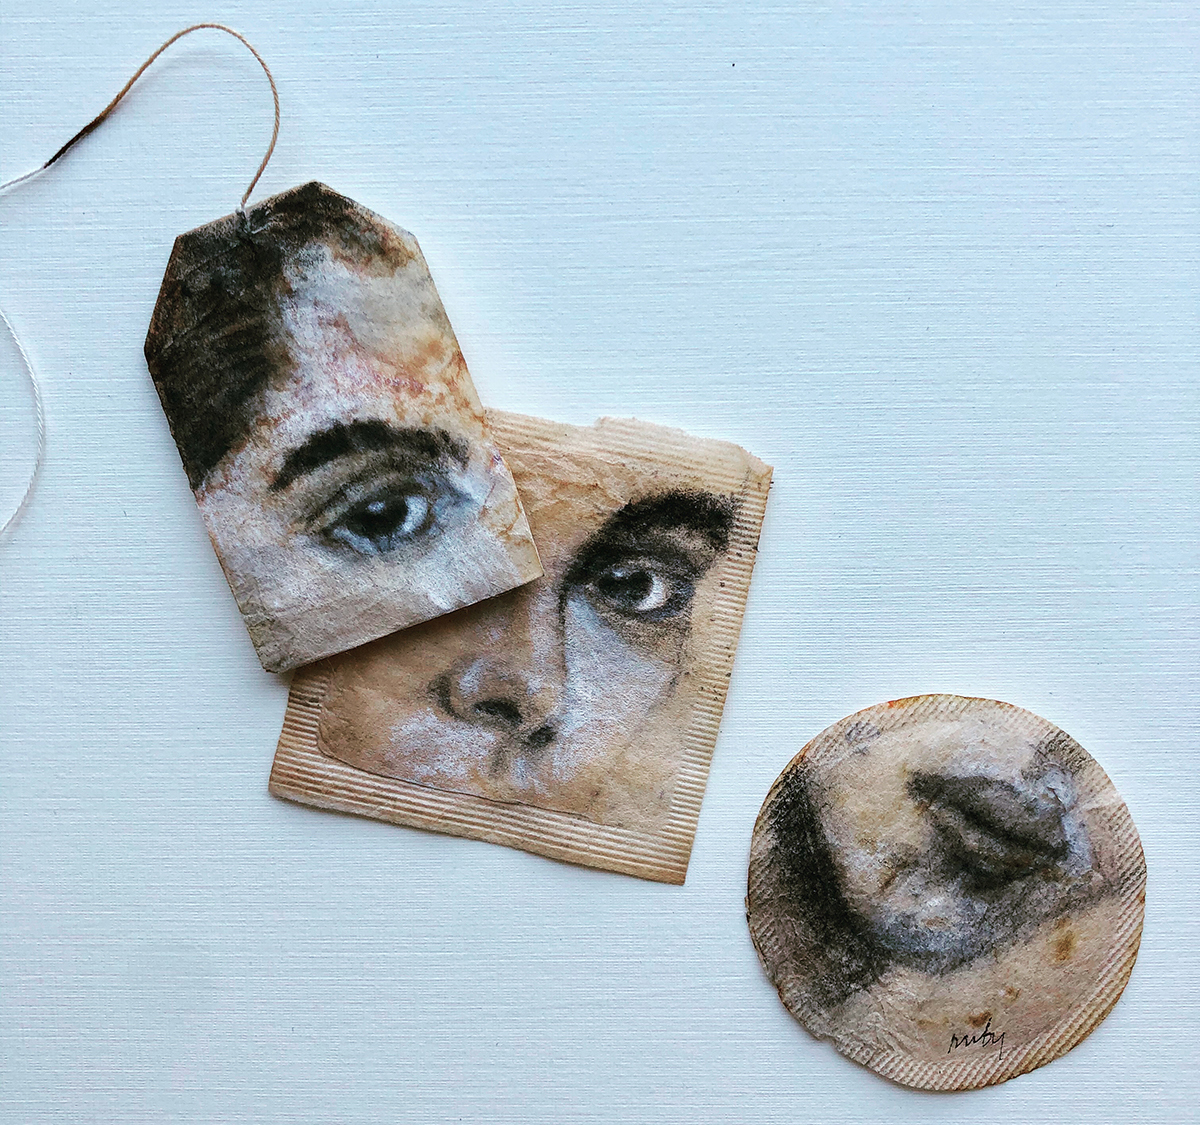 Gorgeous Miniature Watercolors Painted On Used Teabags By Ruby Silvious 19